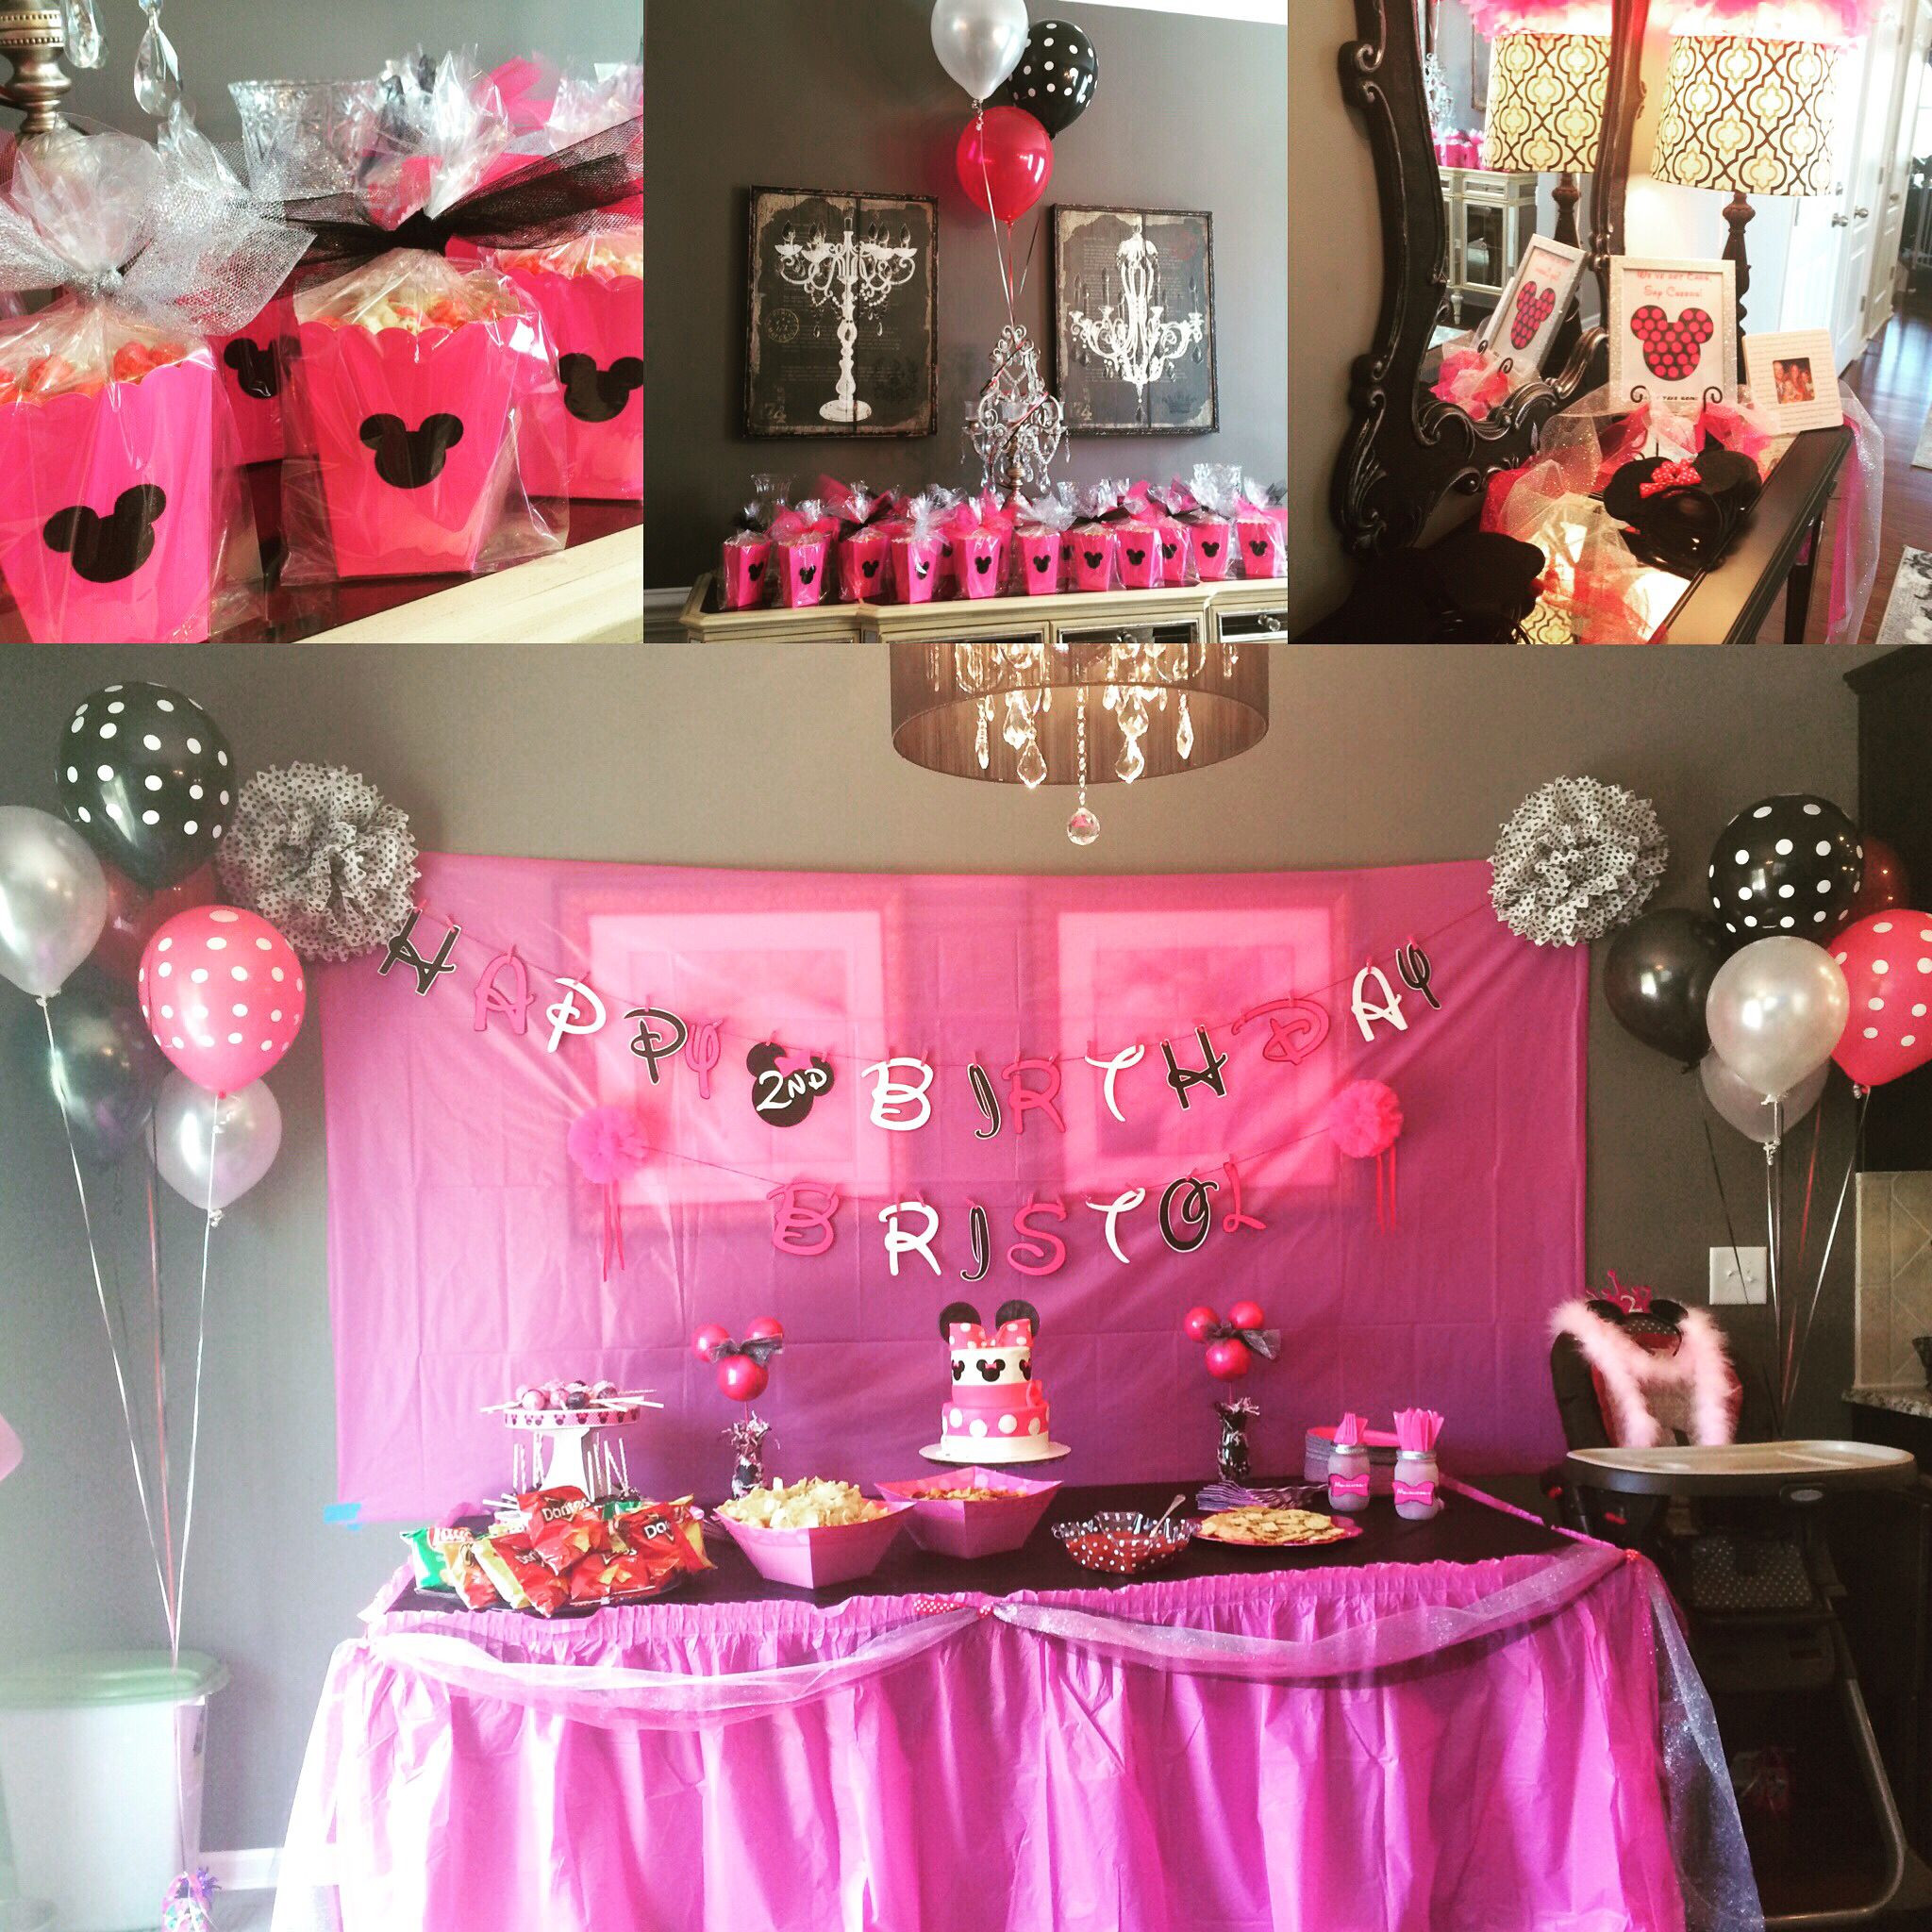 Birthday Party Ideas For 2 Year Girl
 Our Minnie Mouse Birthday for our sweet 2 year old